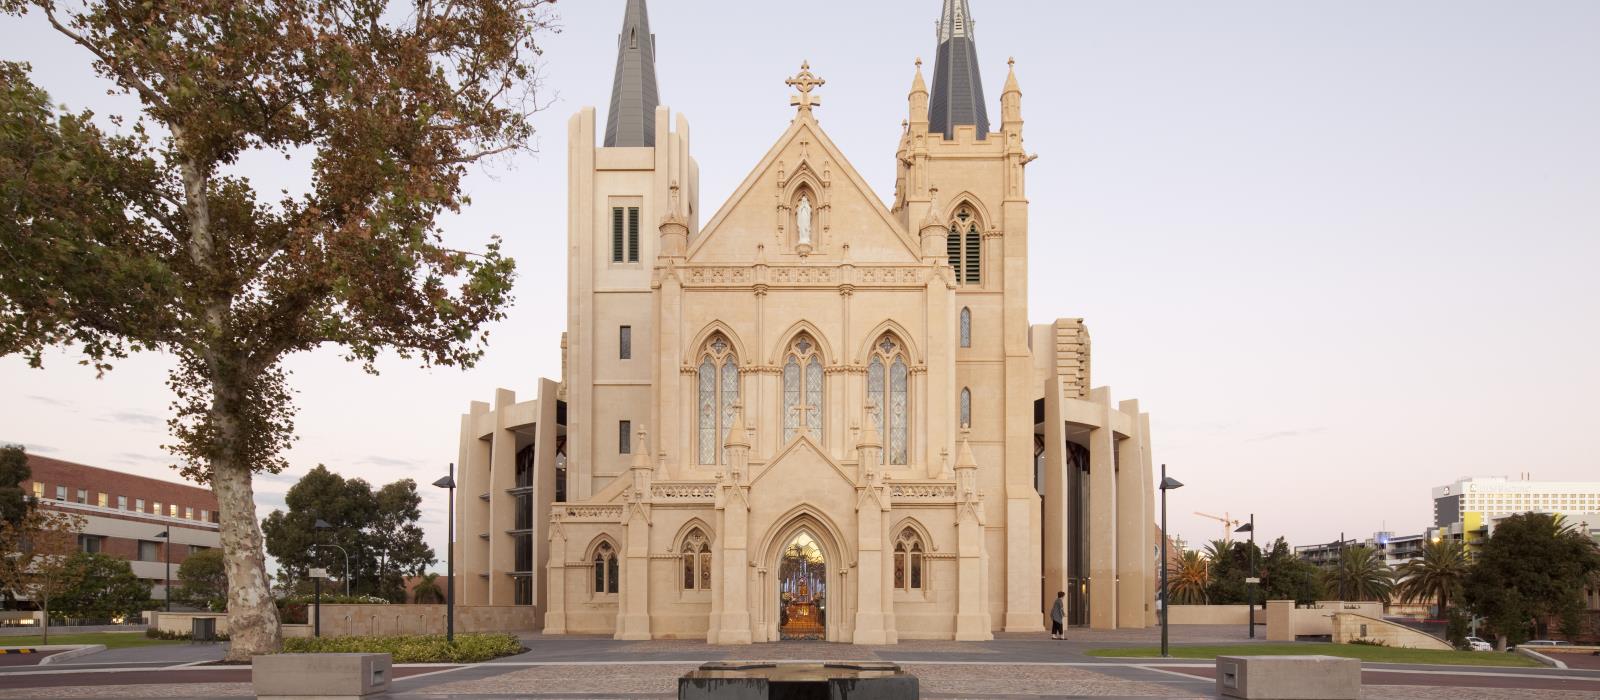 History of the Catholic Cathedrals in Western Australia